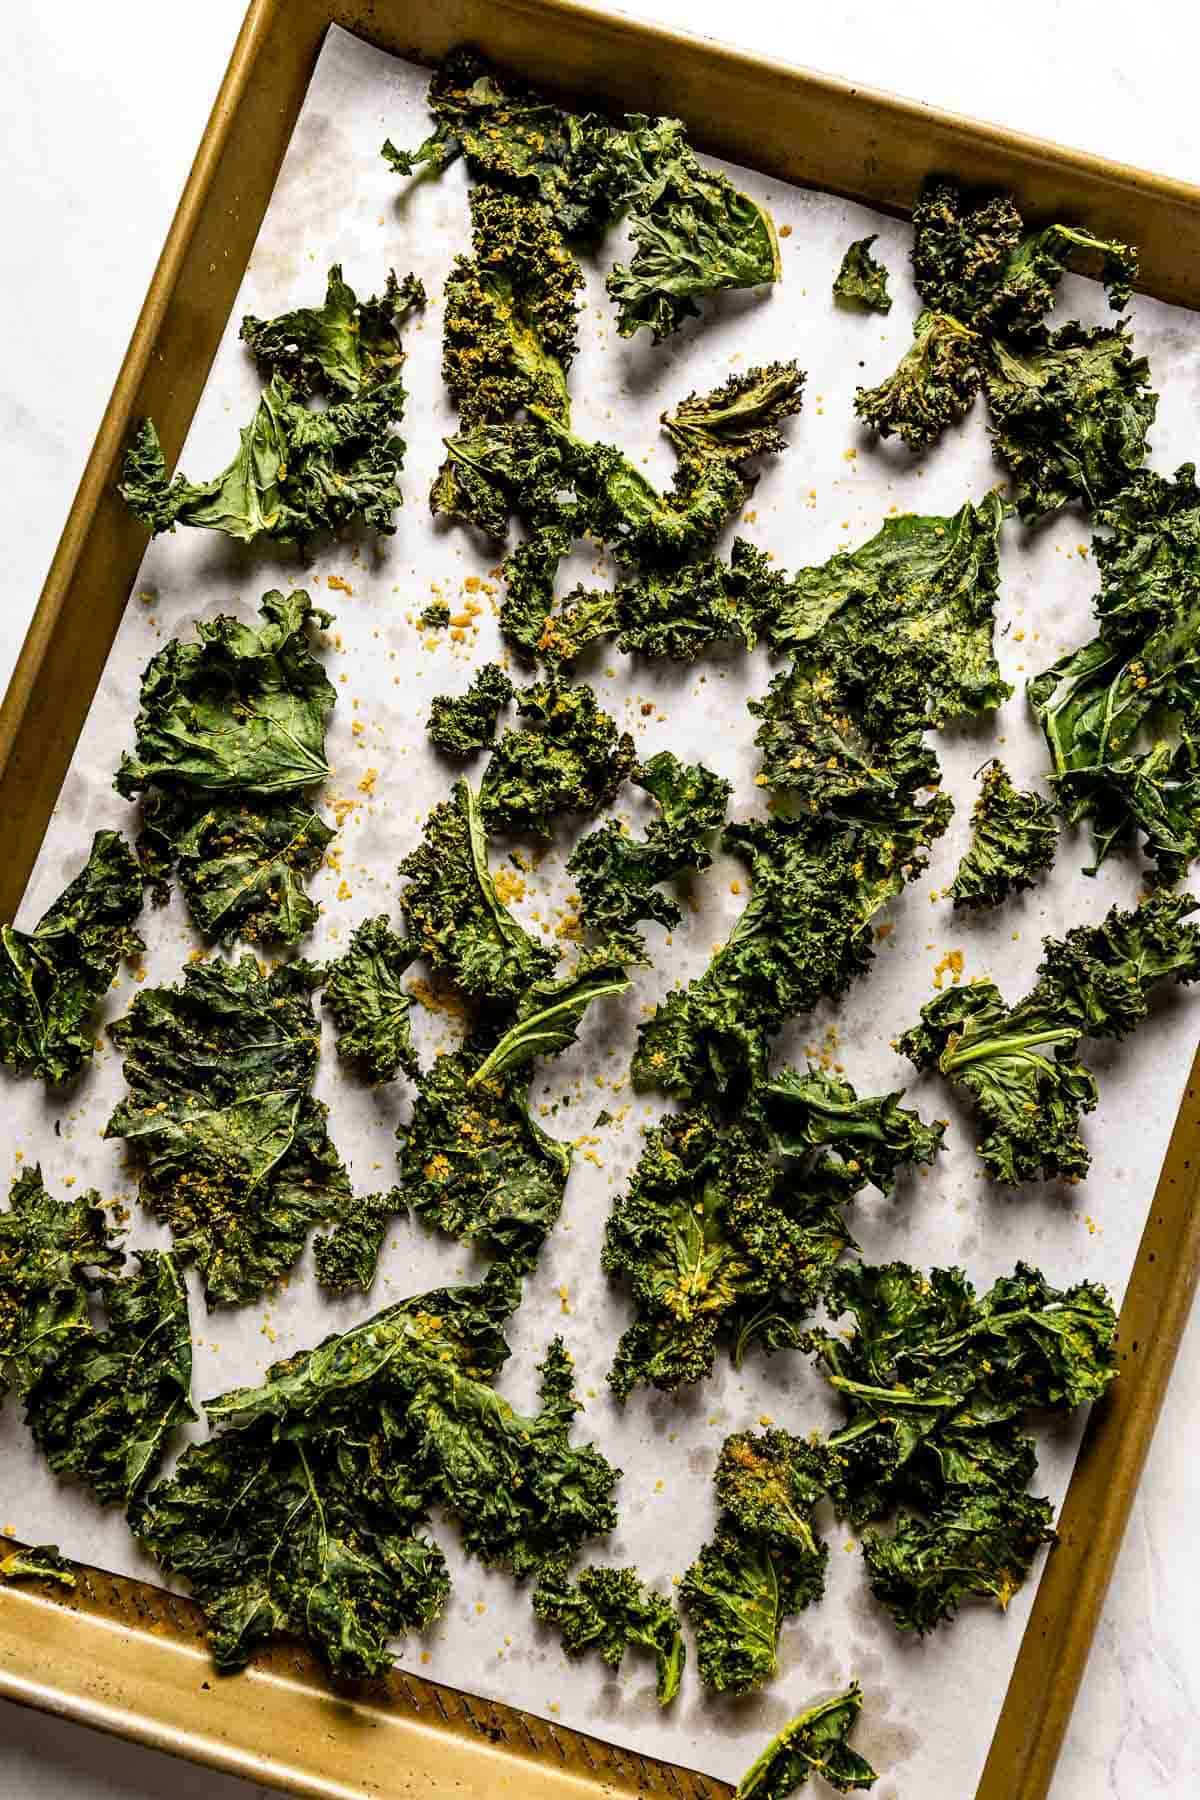 Kale Chips with nutritional yeast after they are baked on a sheet pan.